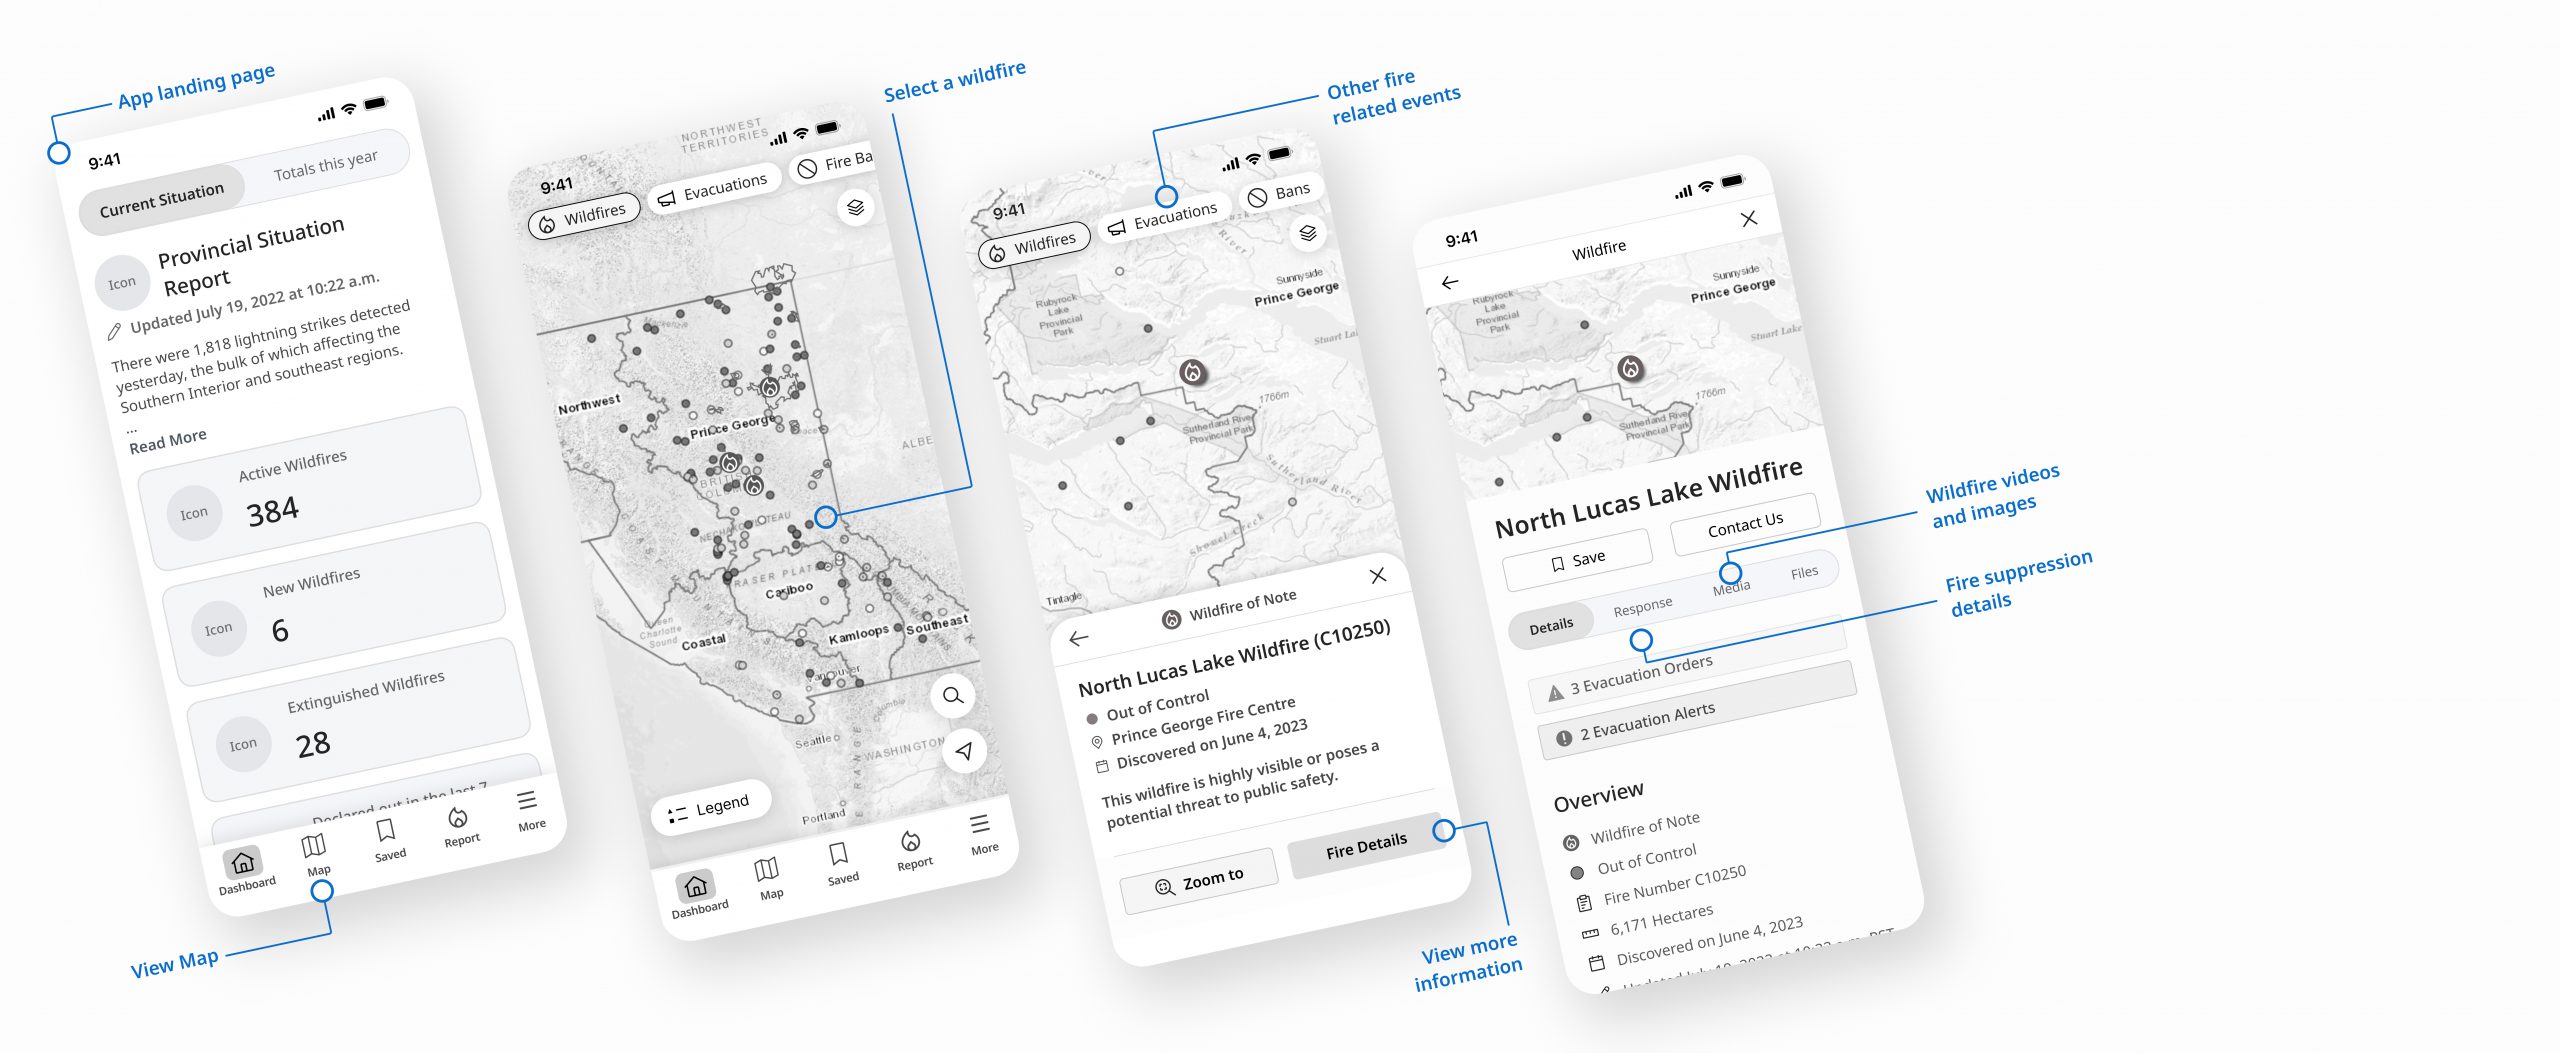 wfnews_wireframes_map_to_full_details-1